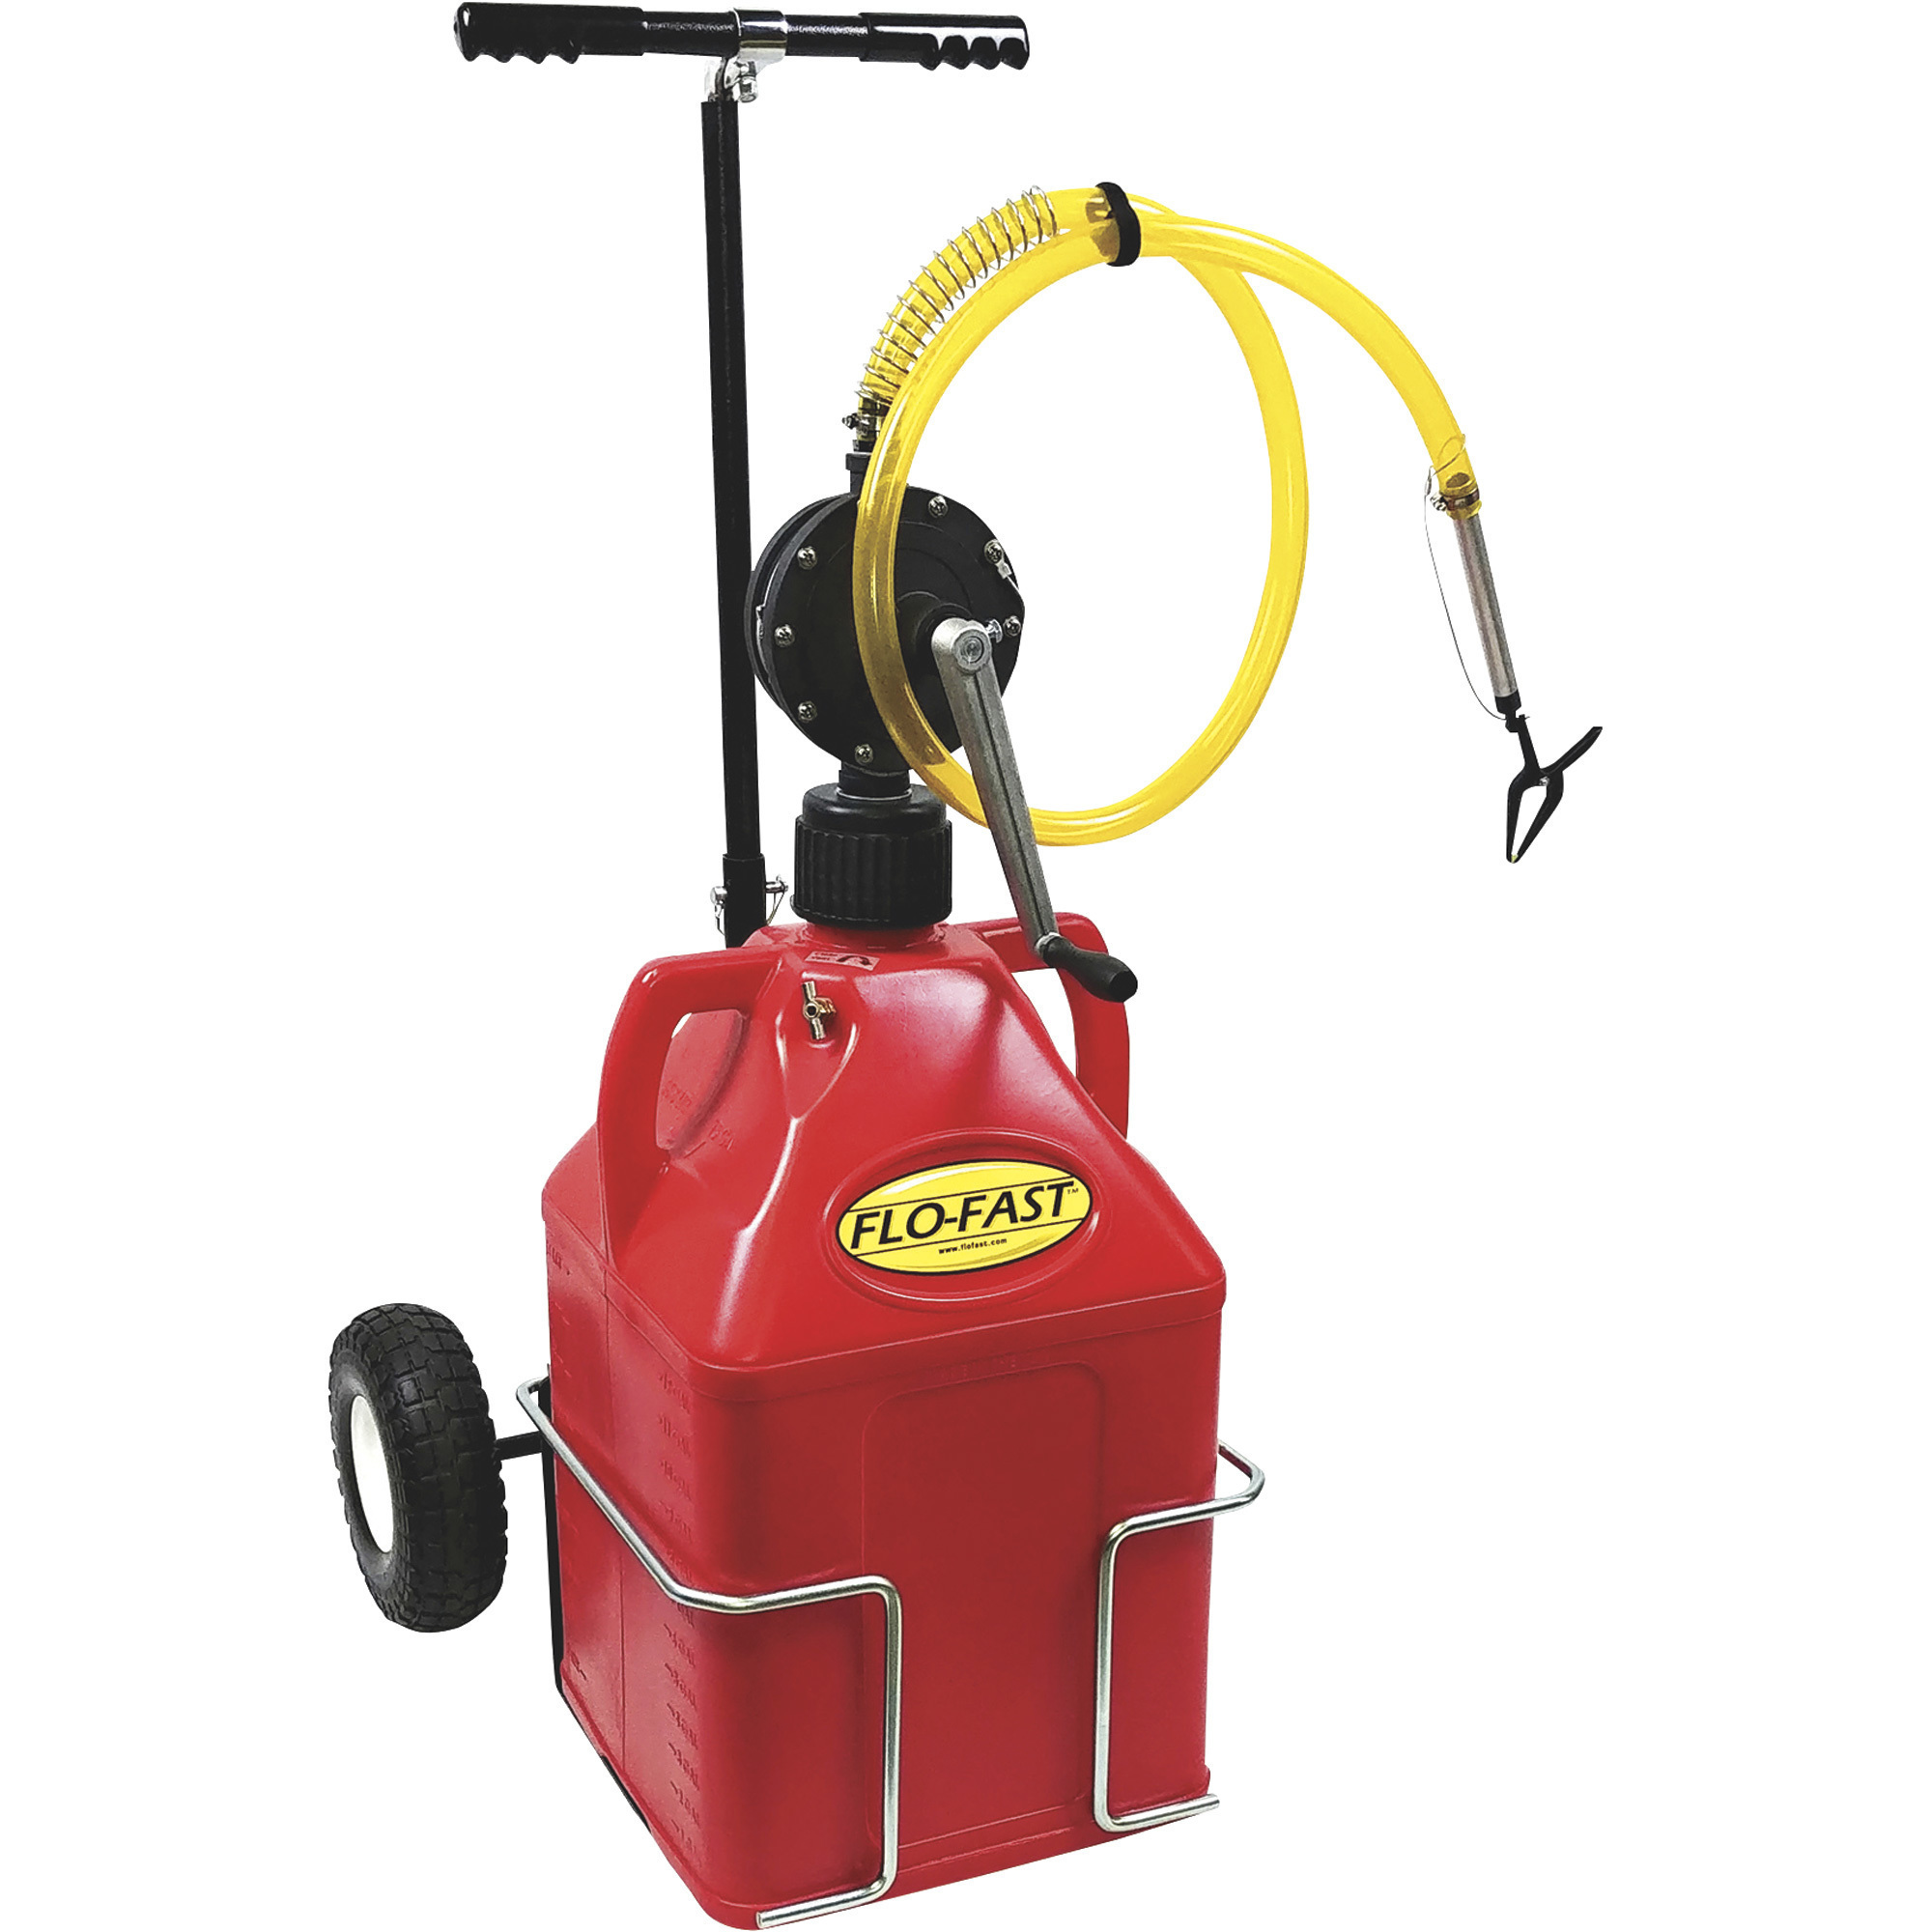 FLO-FAST Gas Container With Pump and Cart, 15-Gallon, Red, For Gasoline, Model 31015-R